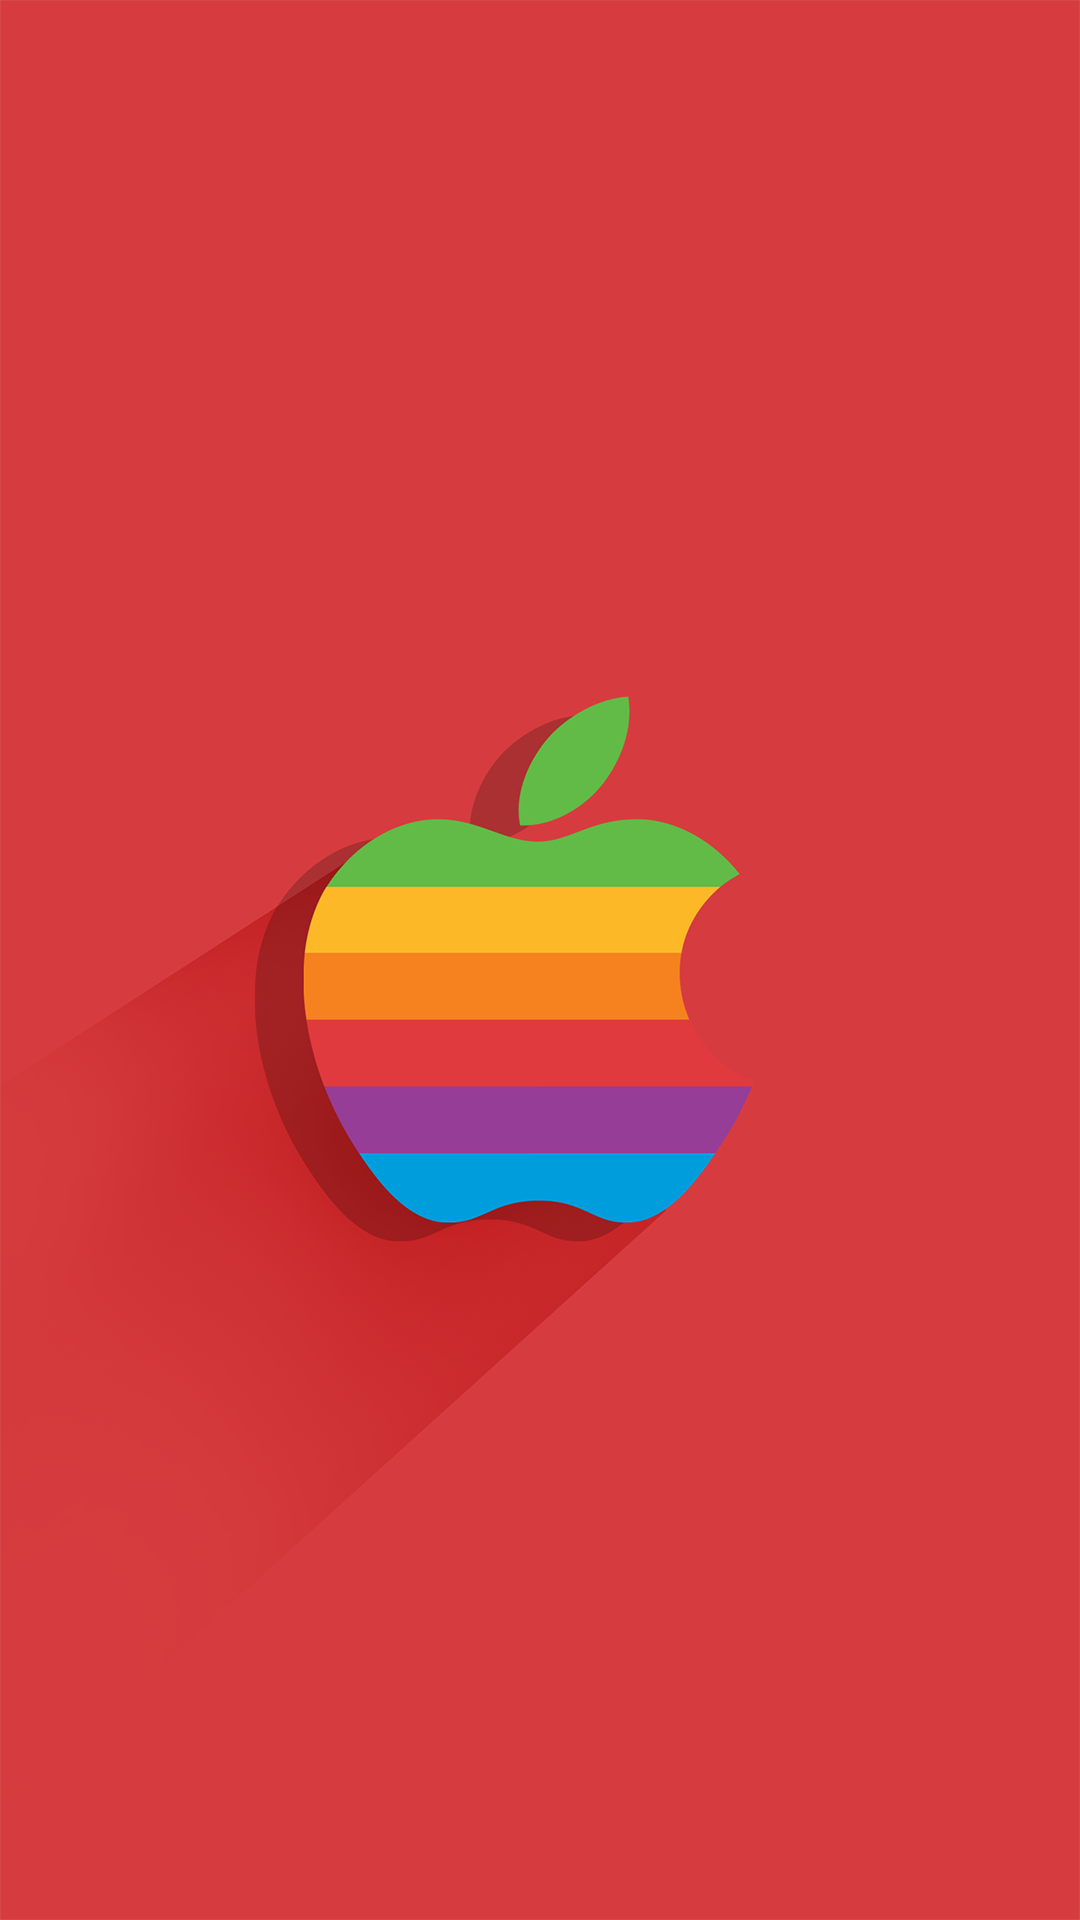 Colorful gradient Apple logo wallpapers for iPhone